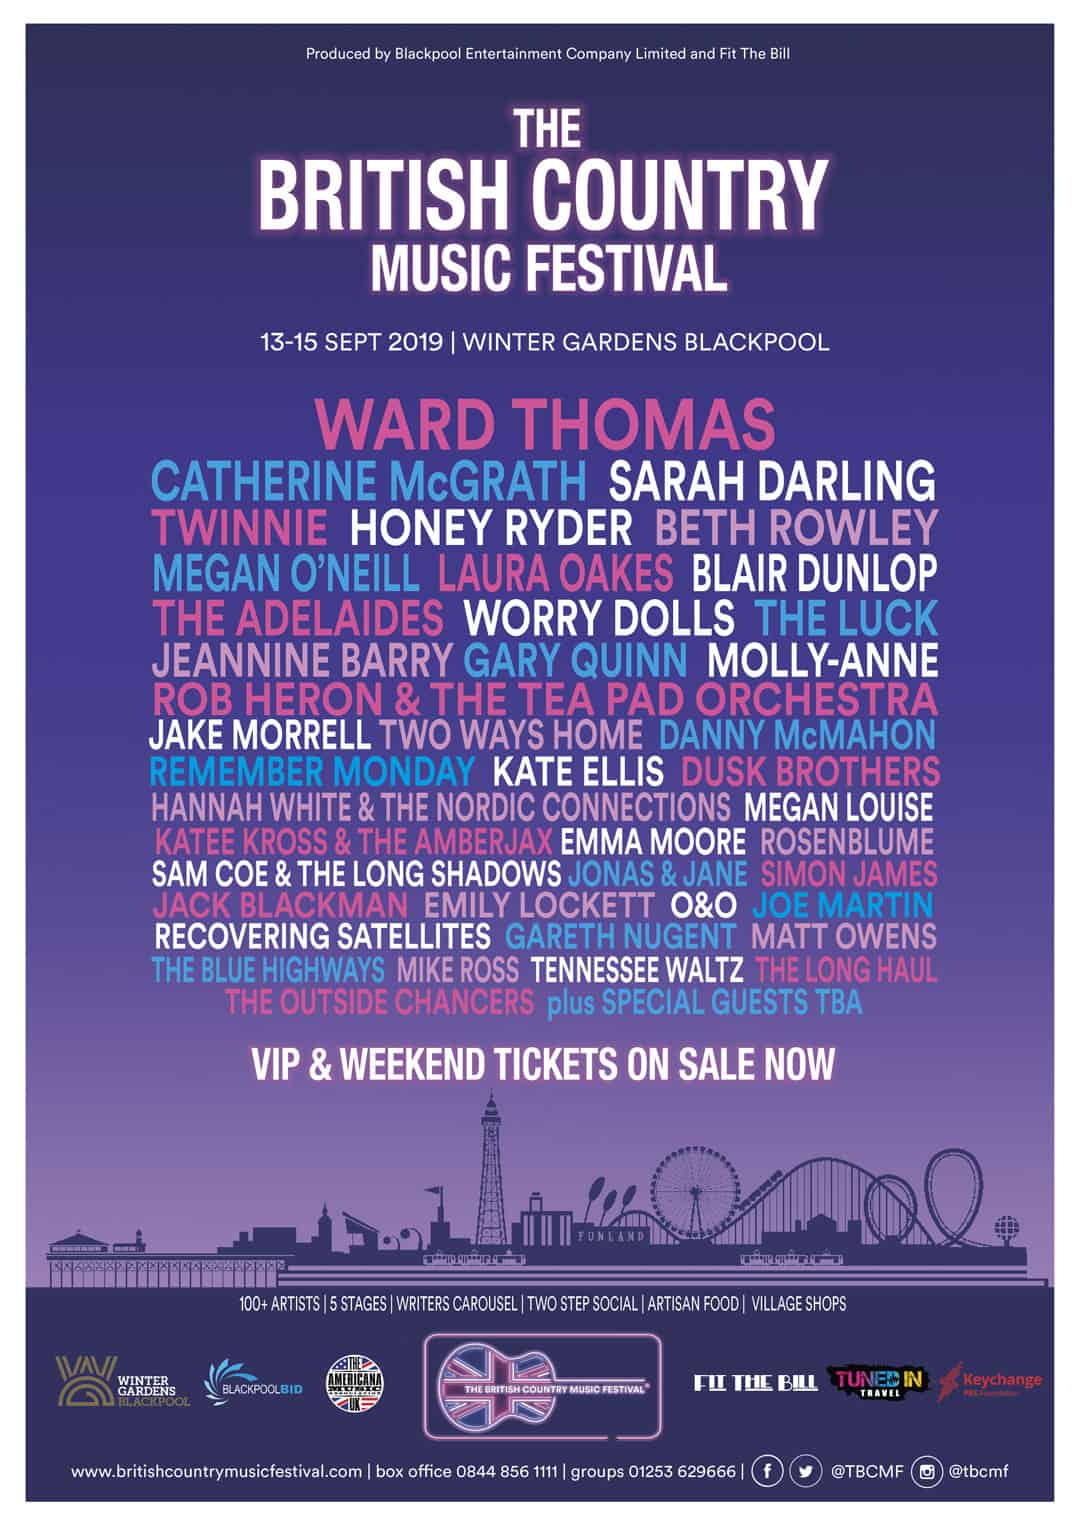 Poster design for The British Country Music Festival 2019